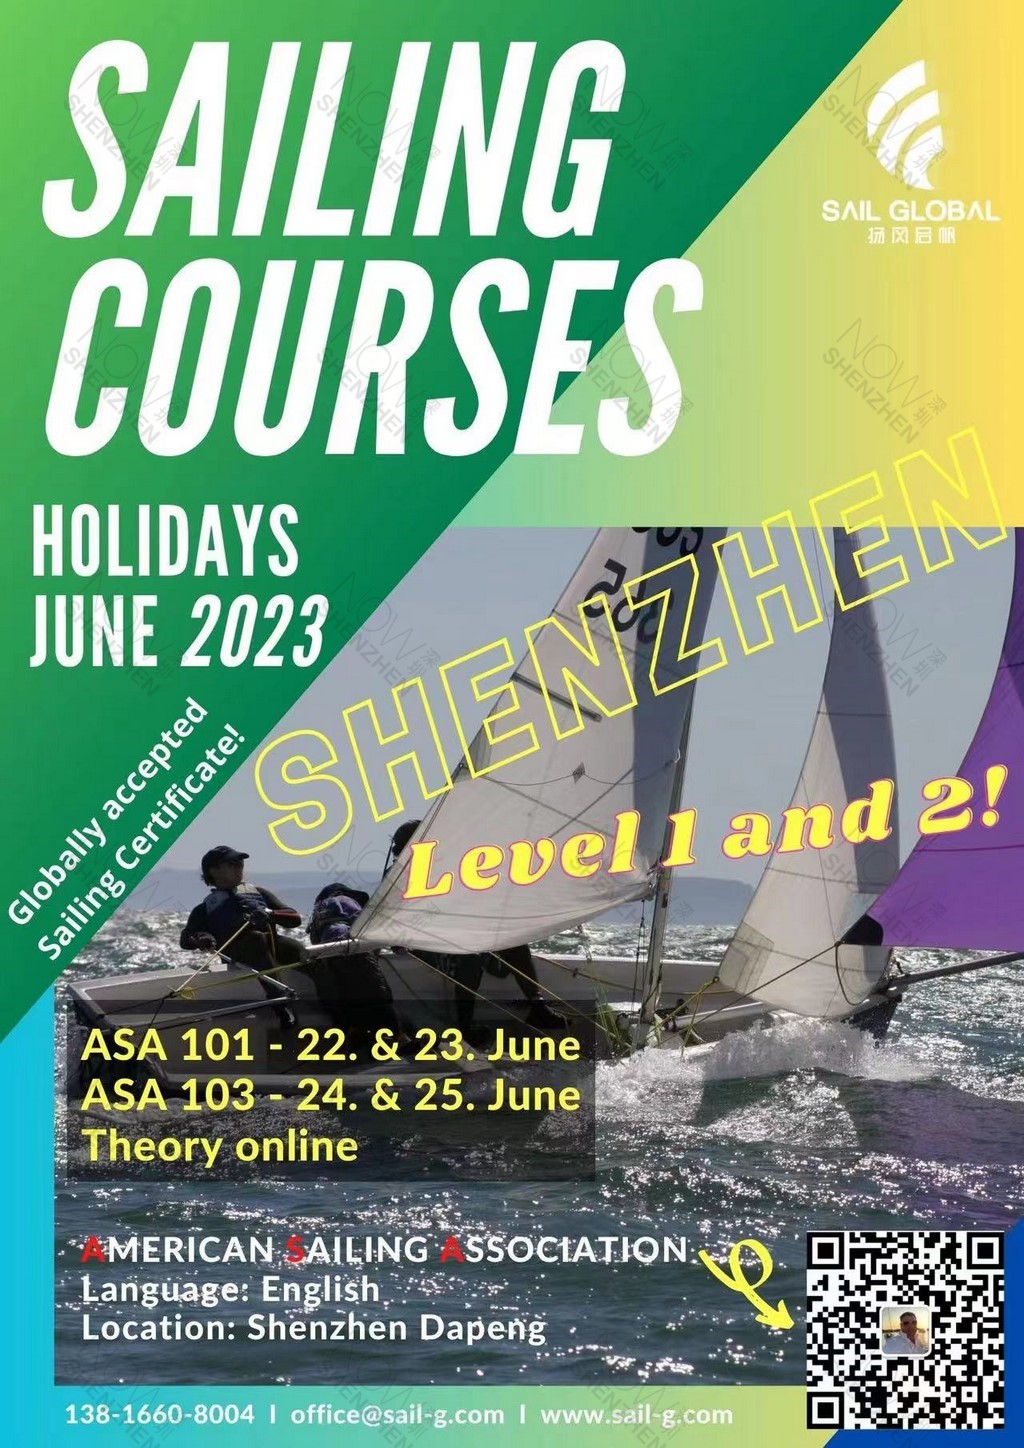 Sailing Courses in June 23 Holidays by Sail Global Dapeng Things to do in Shenzhen, China